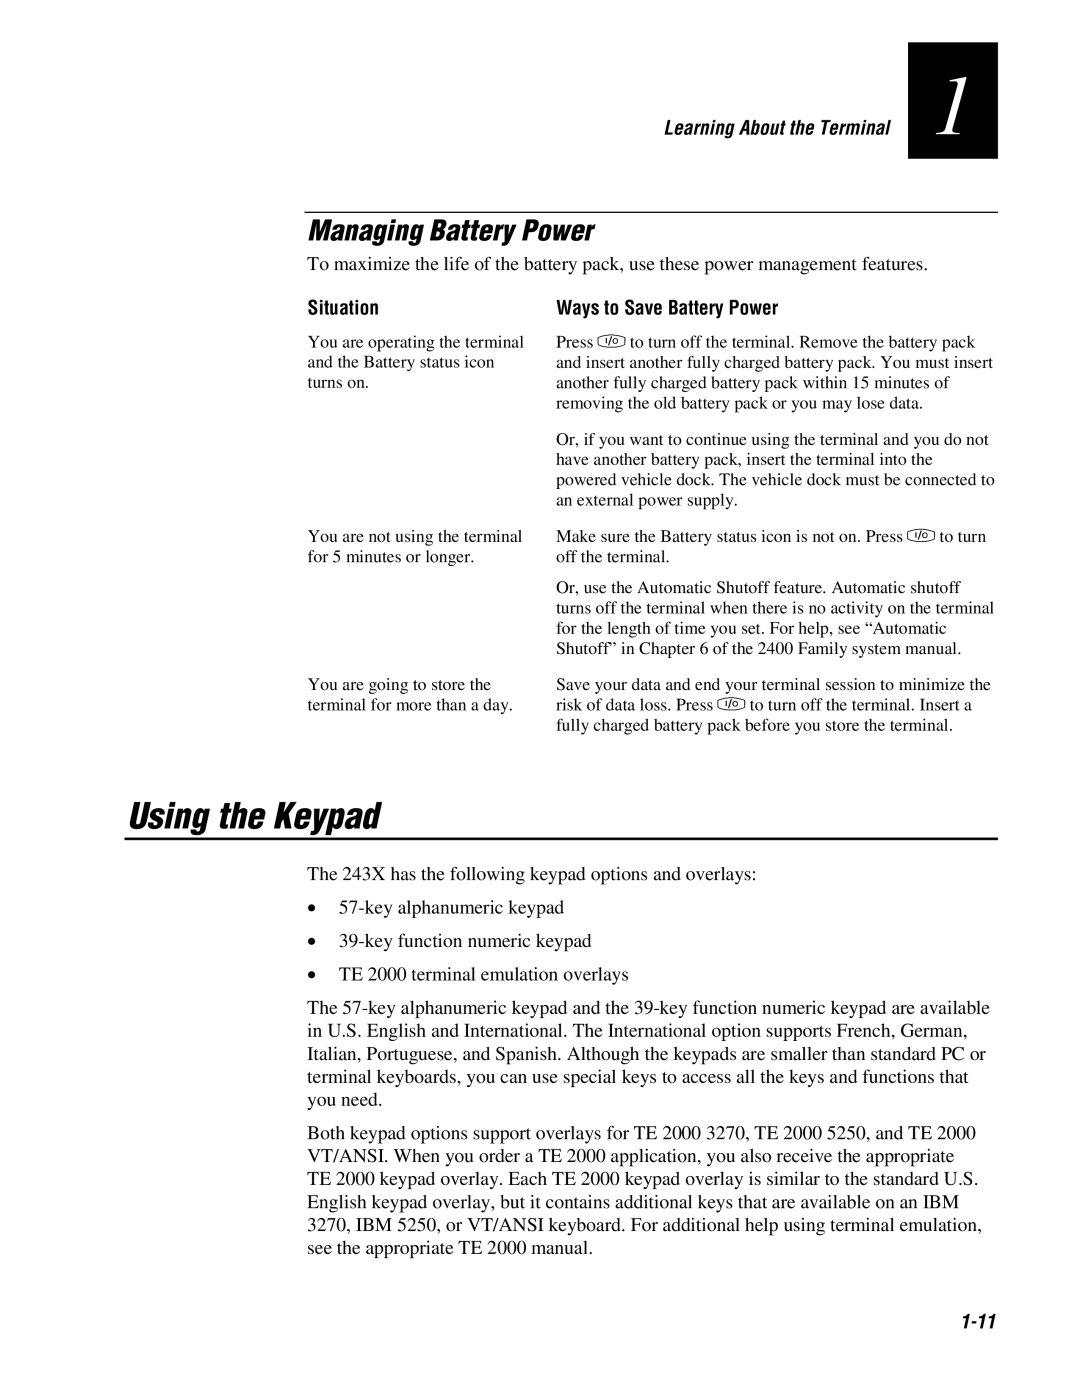 IBM 243X user manual Using the Keypad, Managing Battery Power, Situation, Ways to Save Battery Power, 1-11 